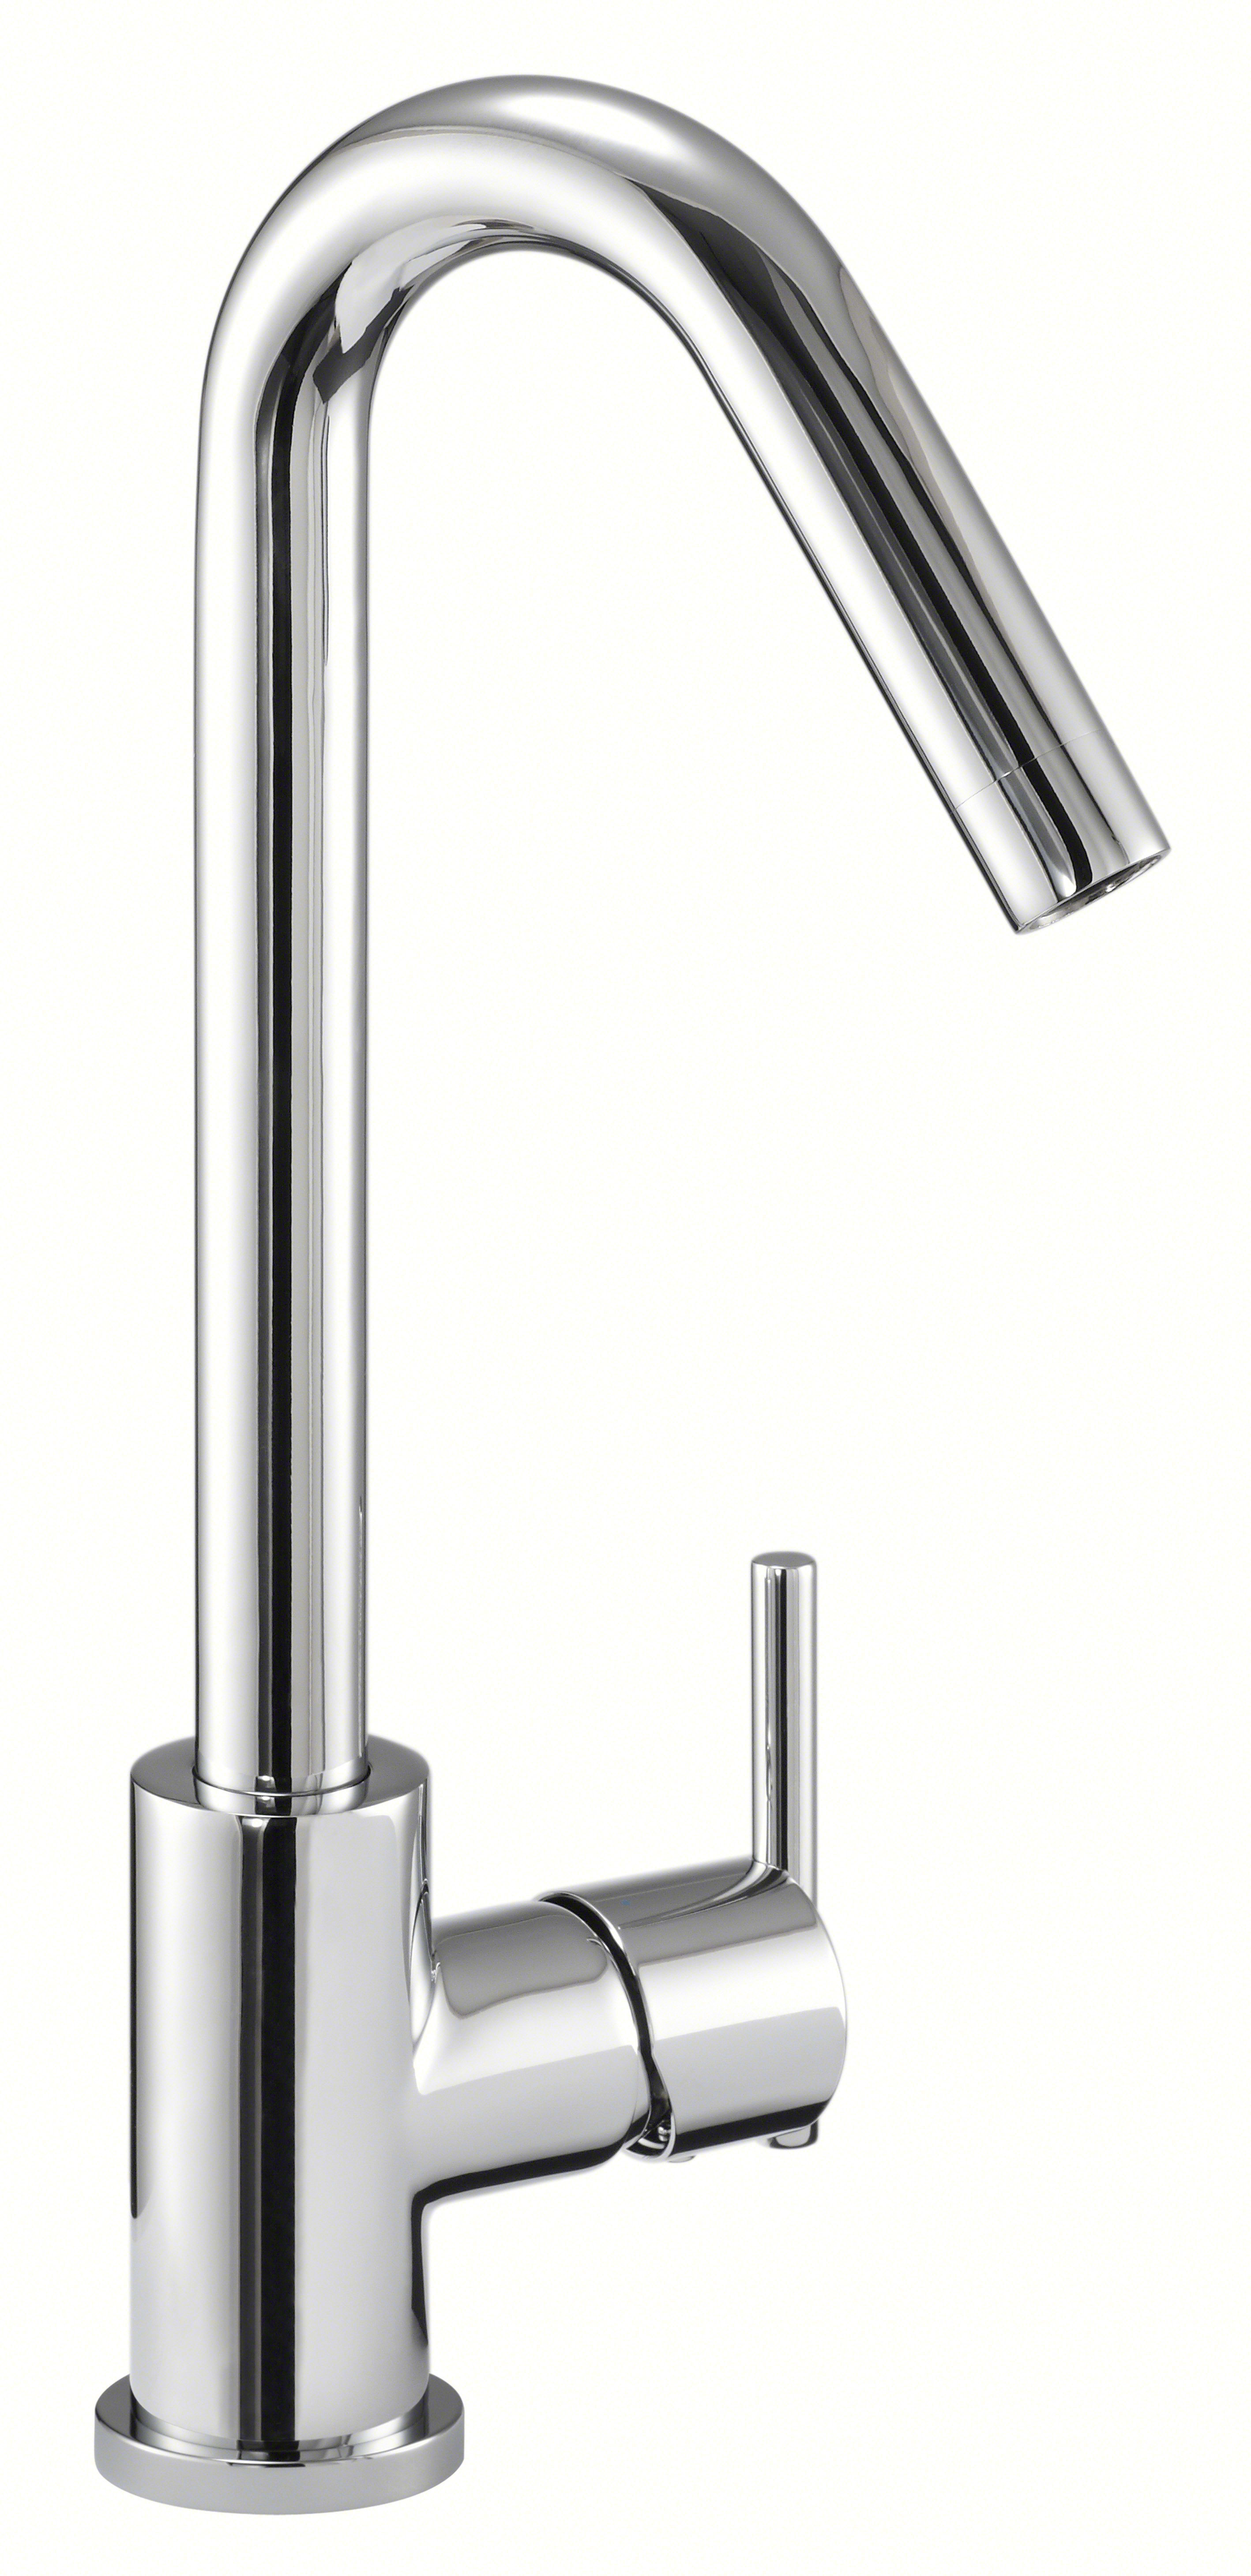 Danze Dh400377 Chrome Kitchen Faucet From The Cain Collection Faucetdirect Com